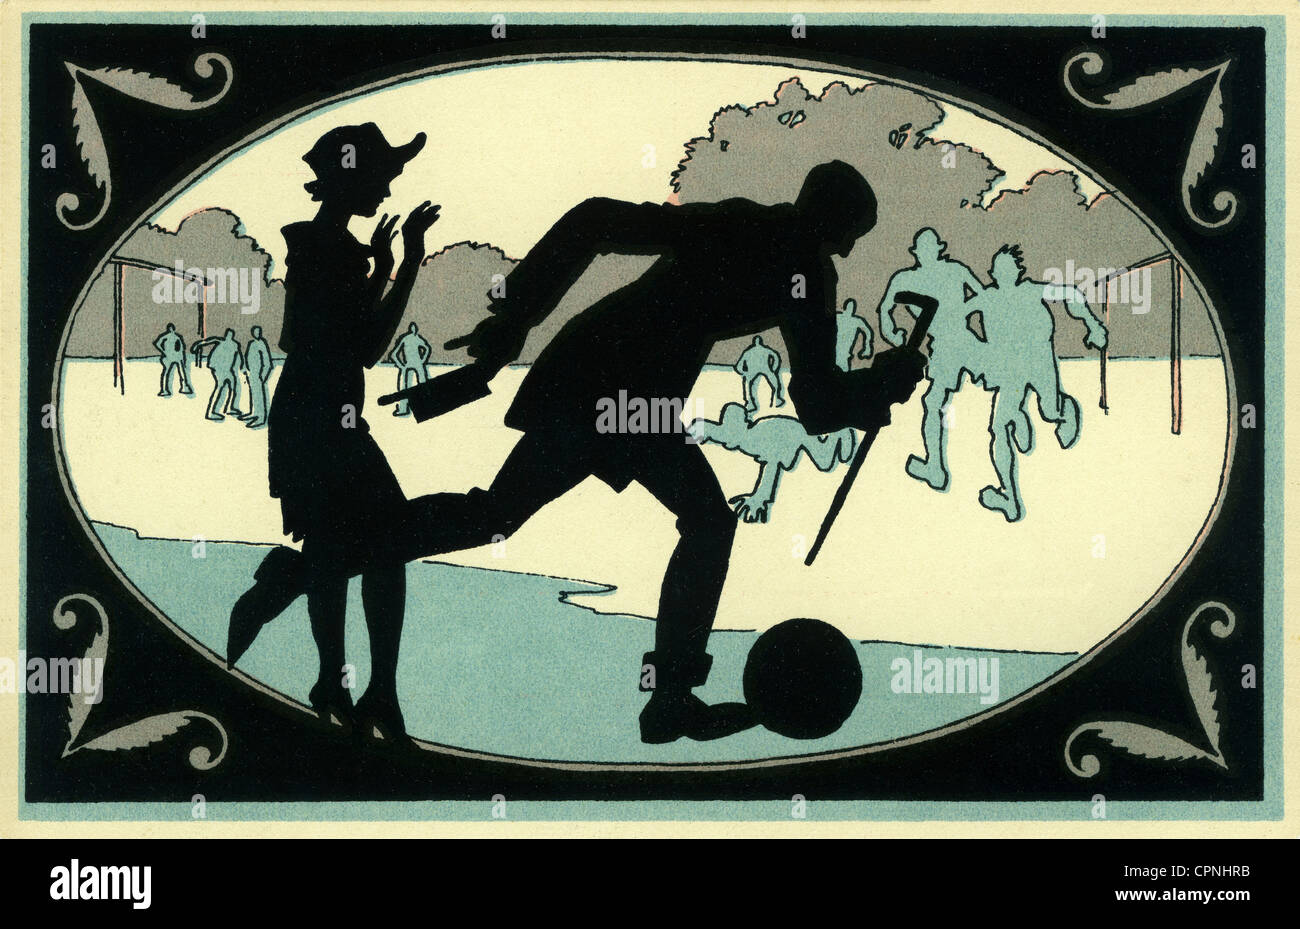 sports, football, football match, audience members joining in the game, silhouette, Germany, circa 1928, Additional-Rights-Clearences-Not Available Stock Photo